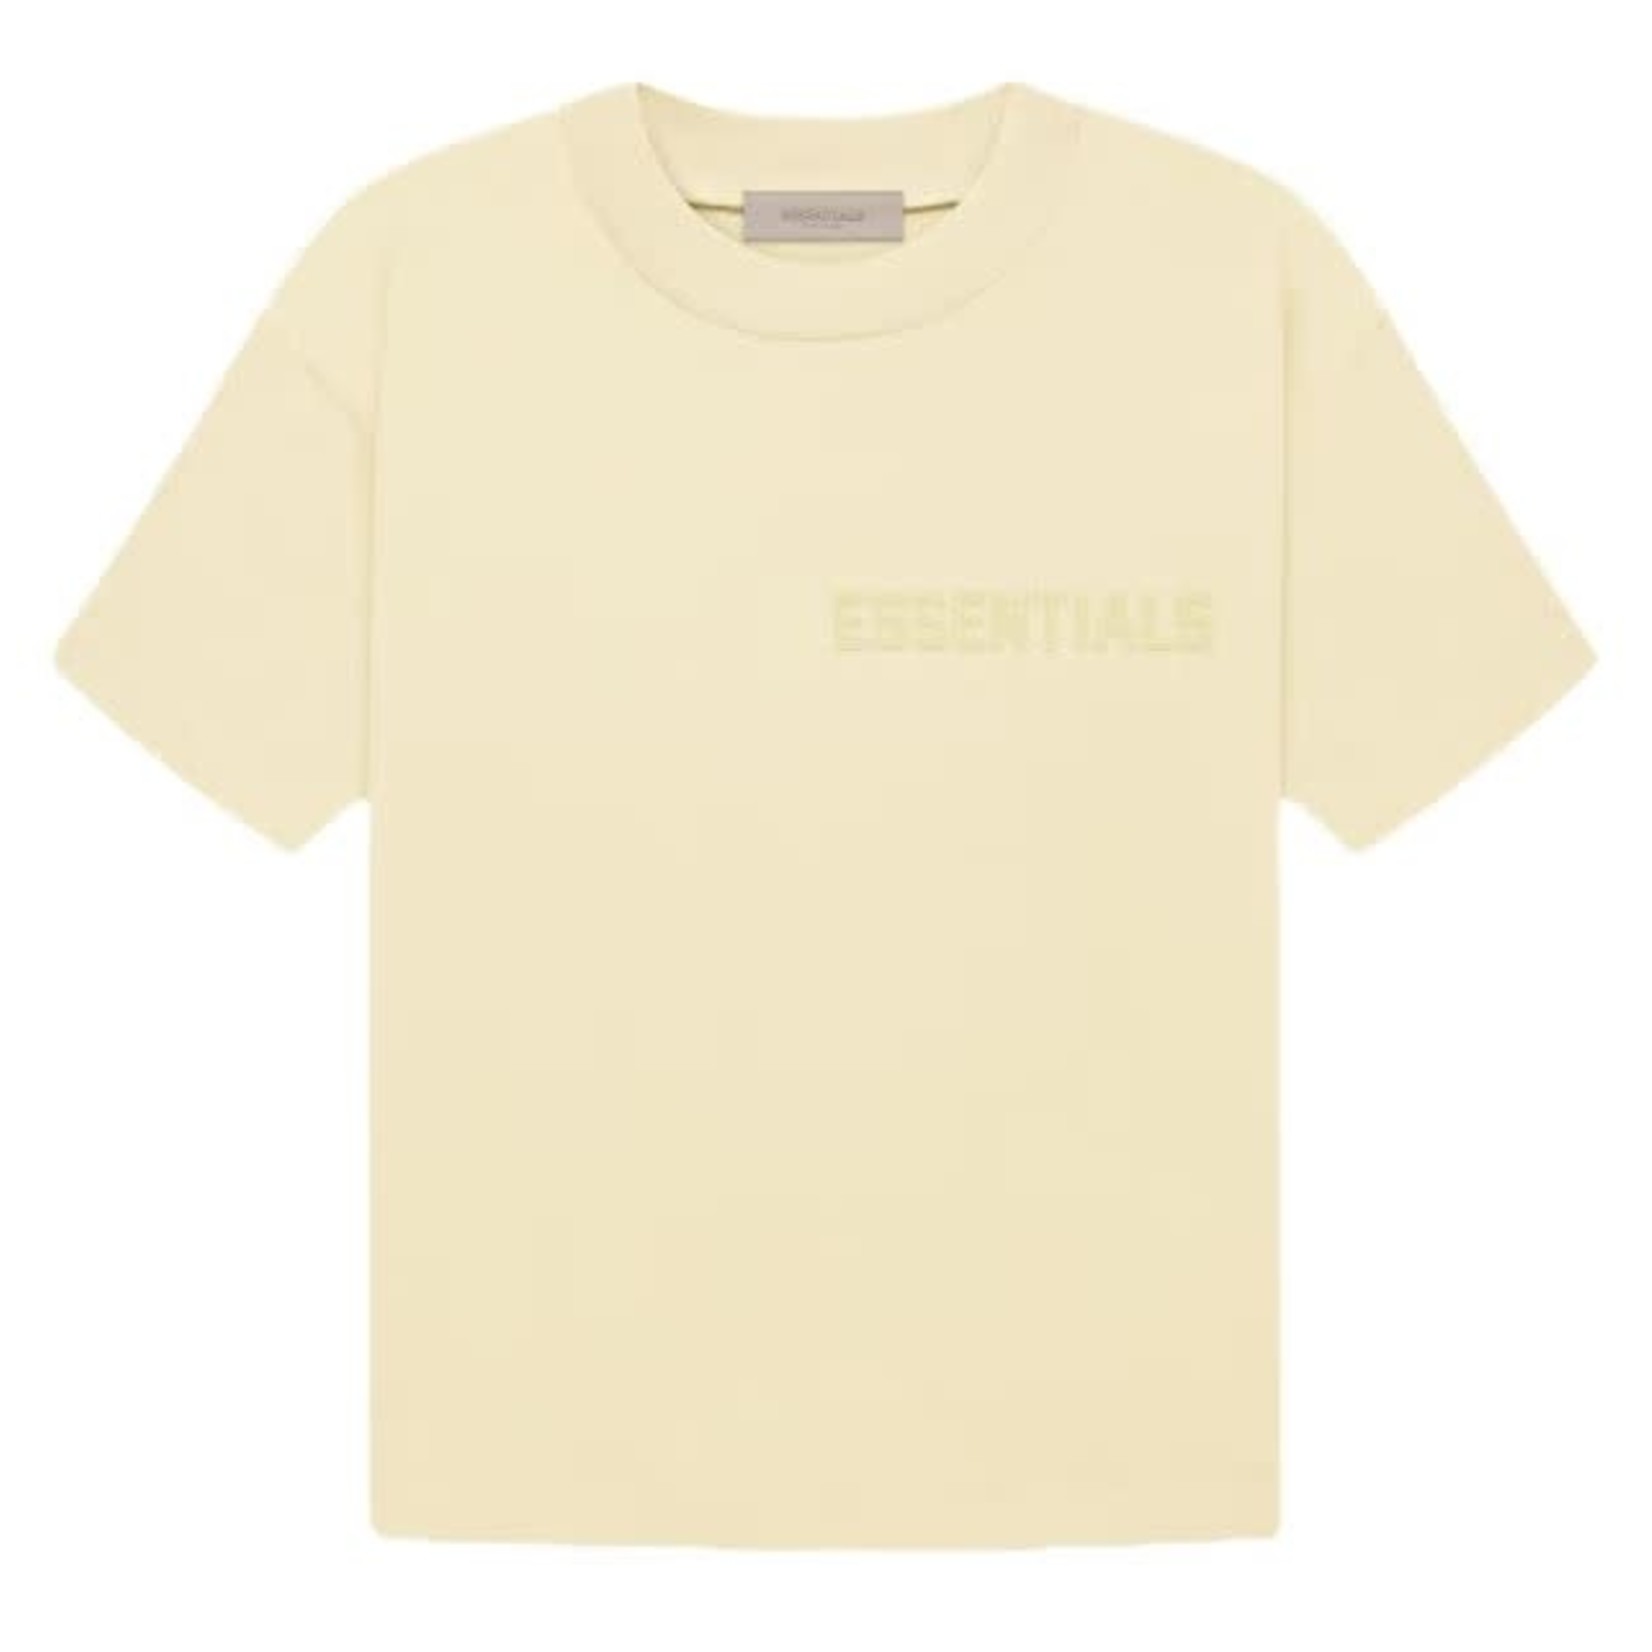 Fear of God Fear Of God Essentials T-Shirt Canary Size Medium, DS BRAND NEW